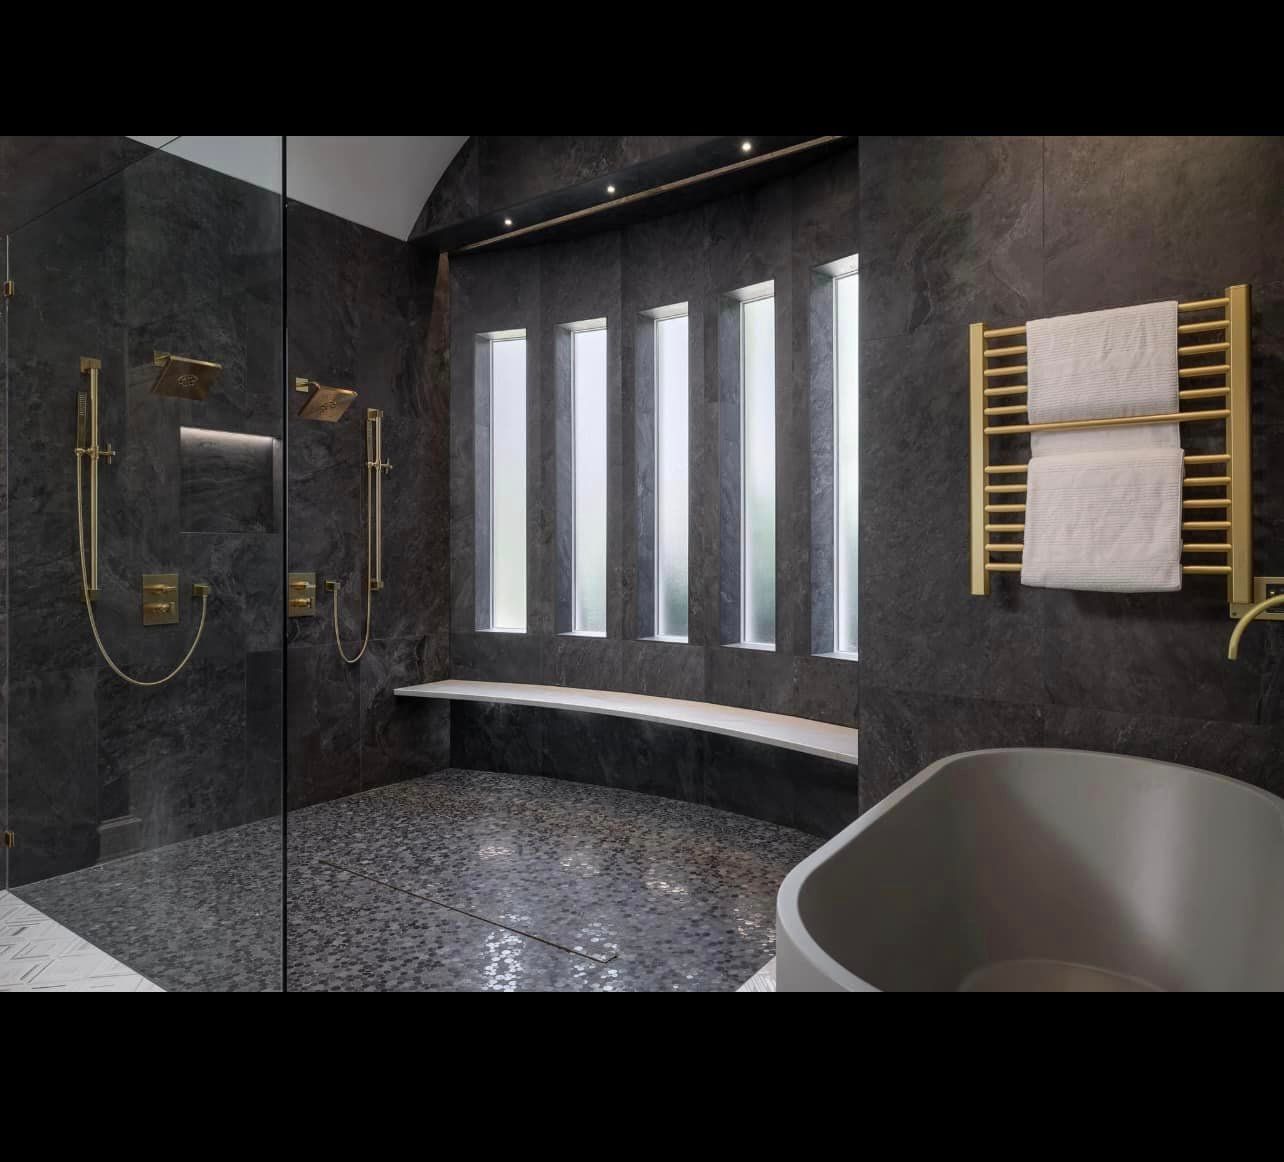 Luxurious Bathroom with Illuminiche Niche, Gold Fixtures, and Tub View